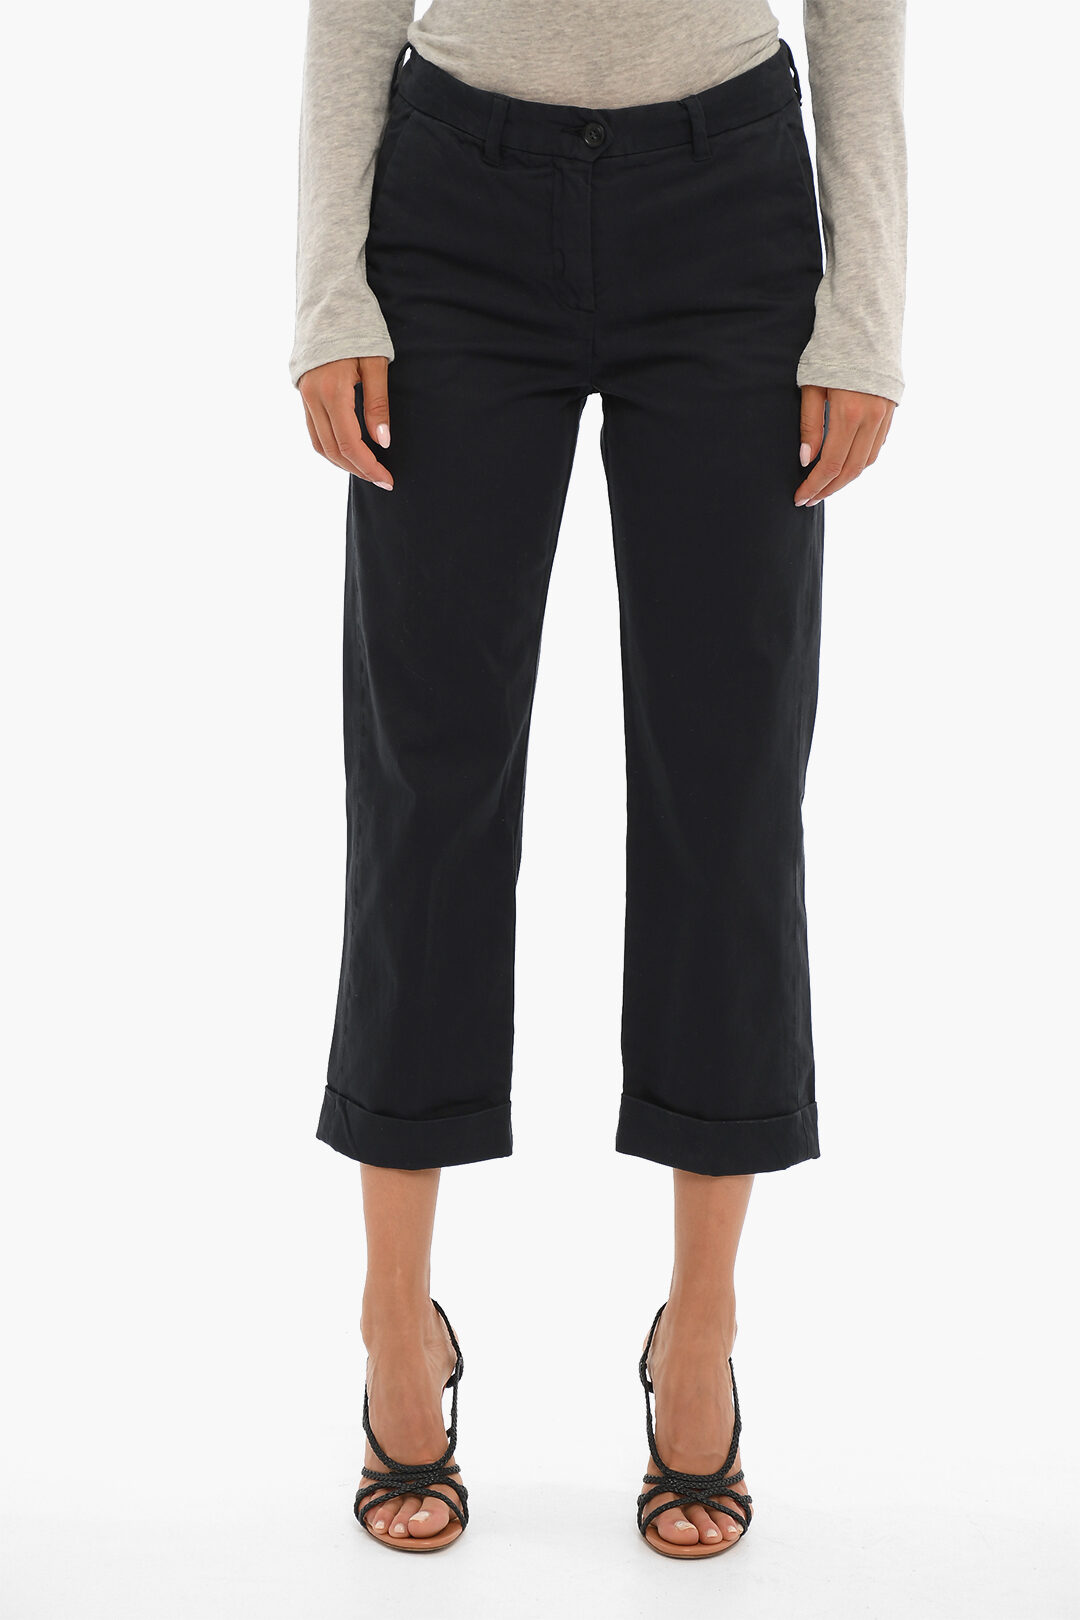 https://data.glamood.com/imgprodotto/cotton-stretch-american-pants-with-belt-loops_1380047_zoom.jpg